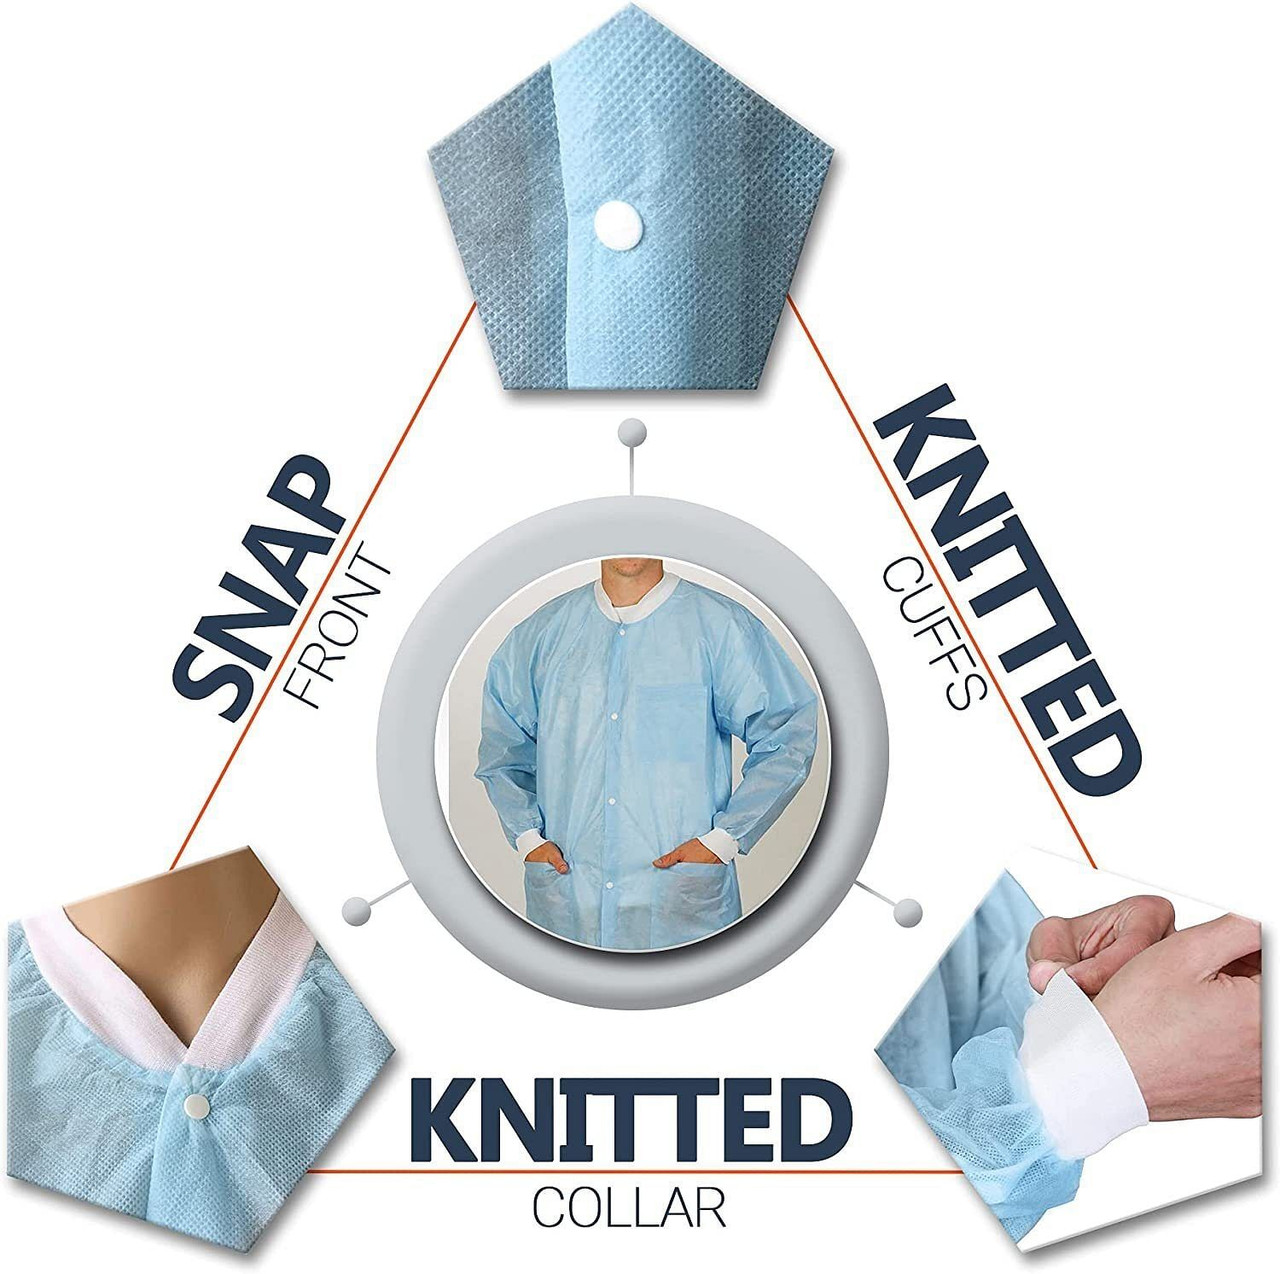 Disposable Lab Coats. Pack of 10 Sky Blue SPP 45 gsm Work Gowns Medium. Protective Clothing with Sn